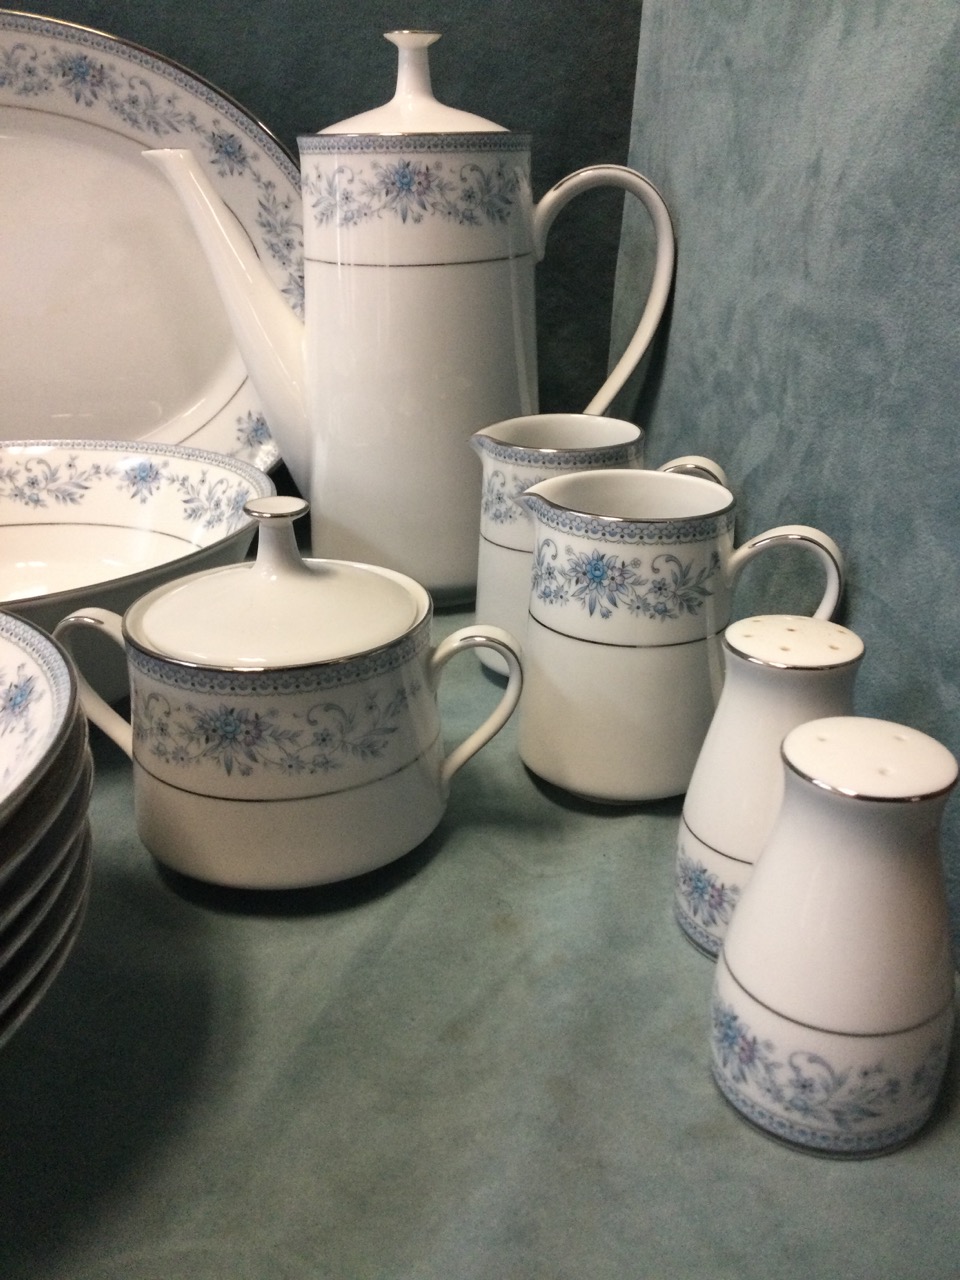 An extensive Noritake porcelain dinner service in the Blue Hill pattern with a covered tureen, an - Image 2 of 3